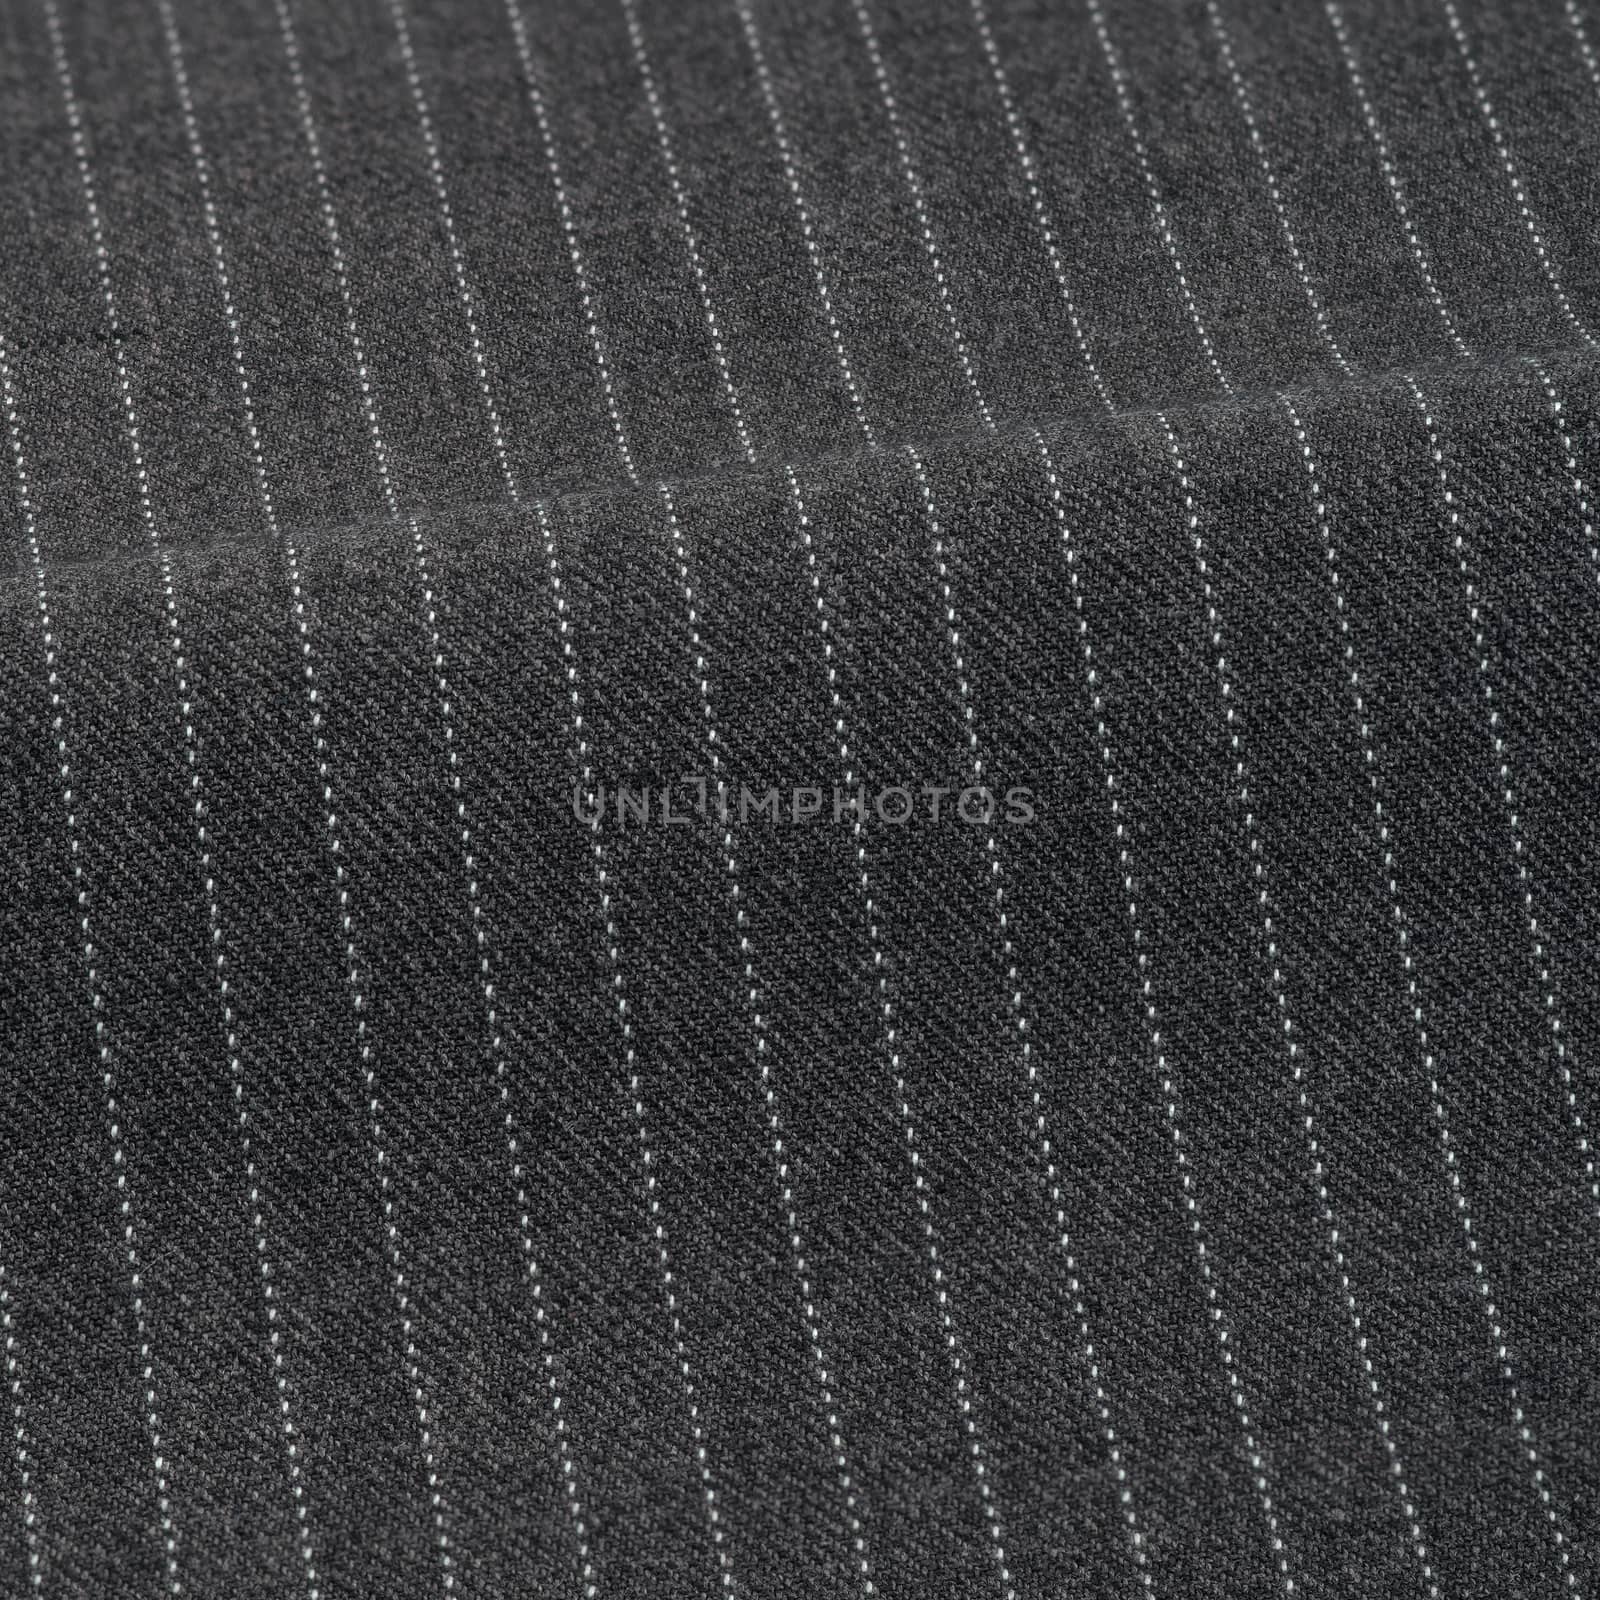 Fabric samples texture gray and white collar macro photography